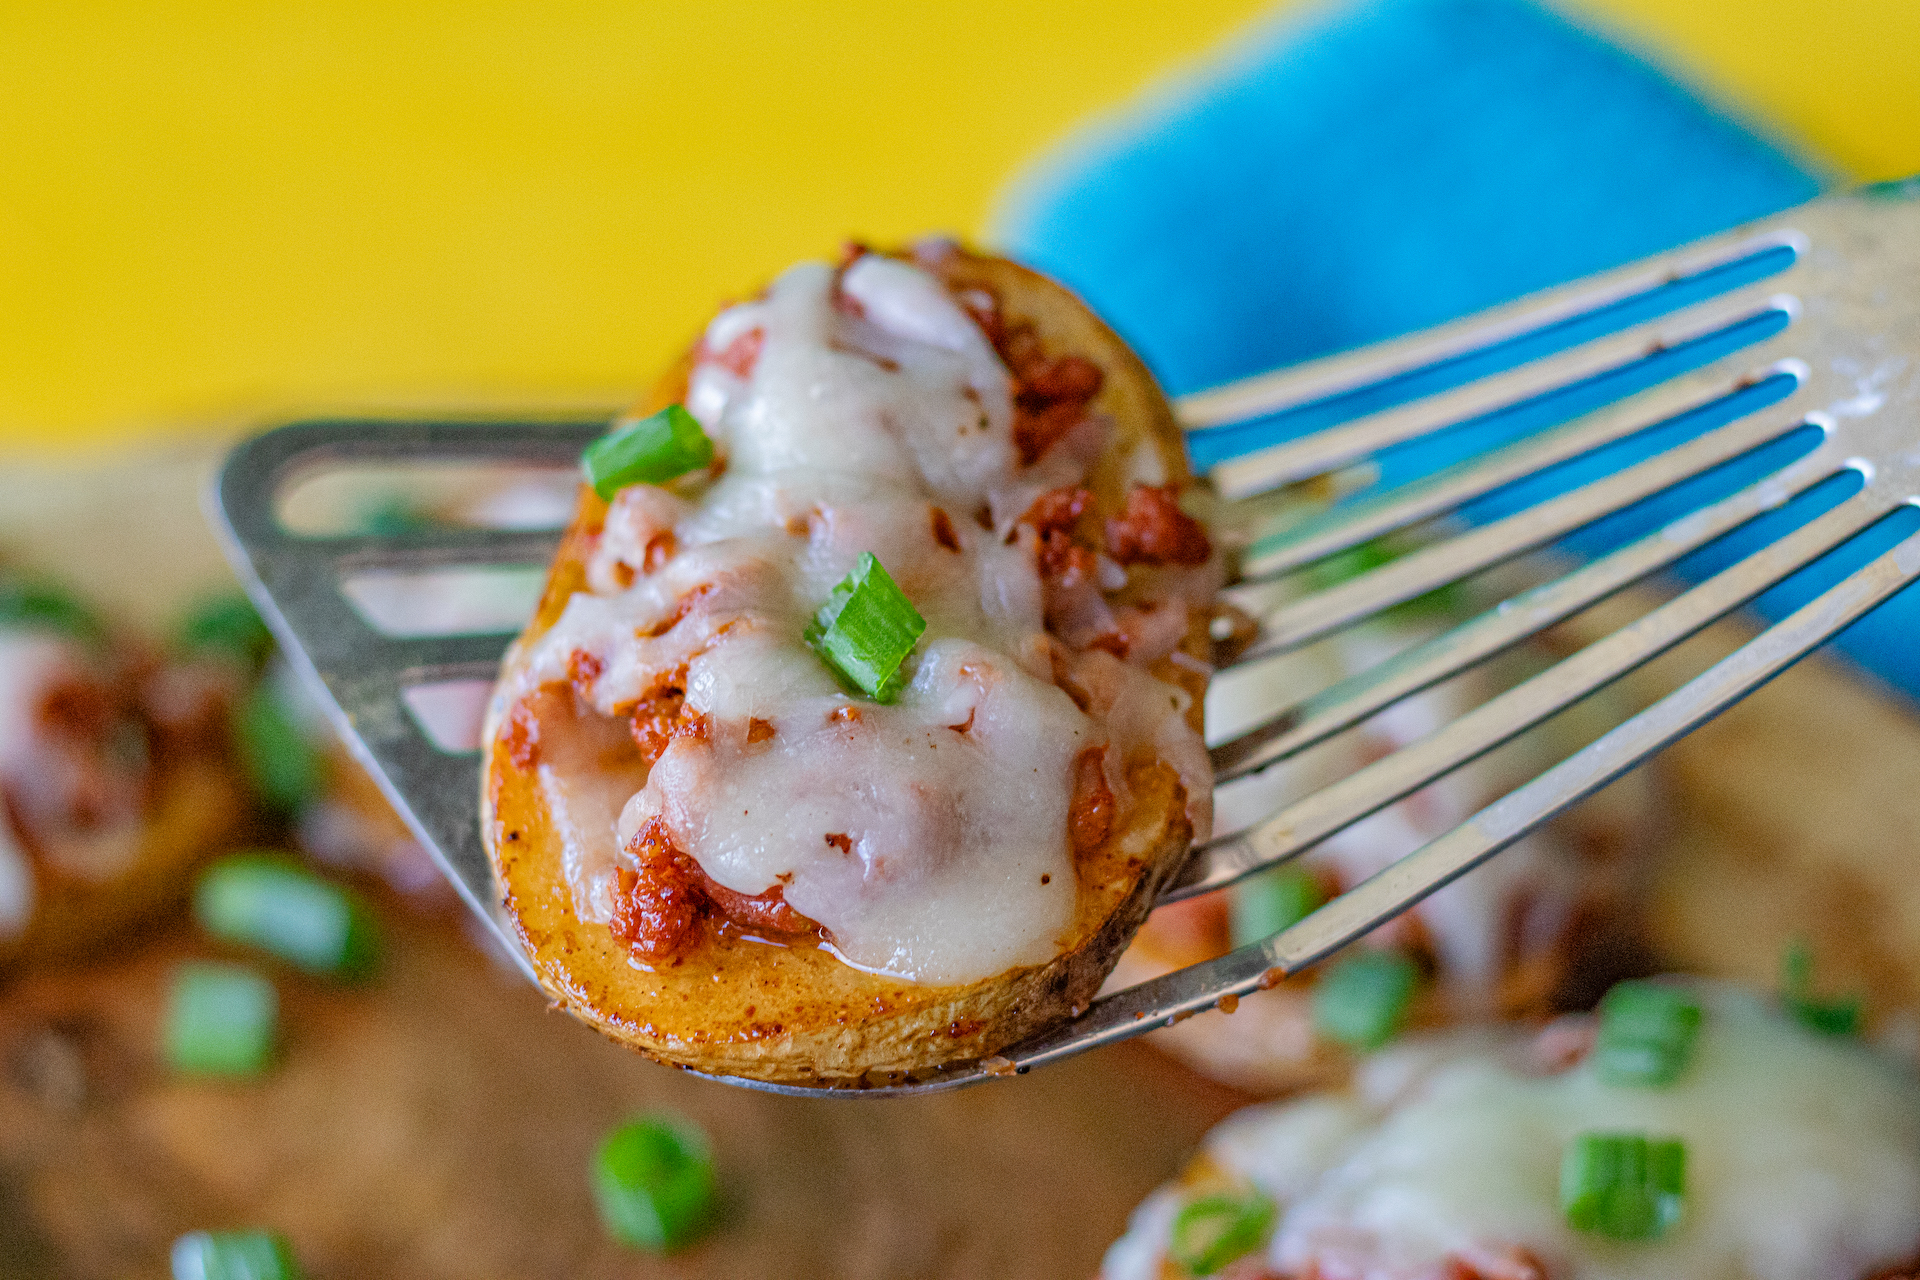 A Chorizo Baked Potato Slice being held up. You can see the potato slice is topped with chorizo, melted cheese and chopped green onions. Looks delicious!